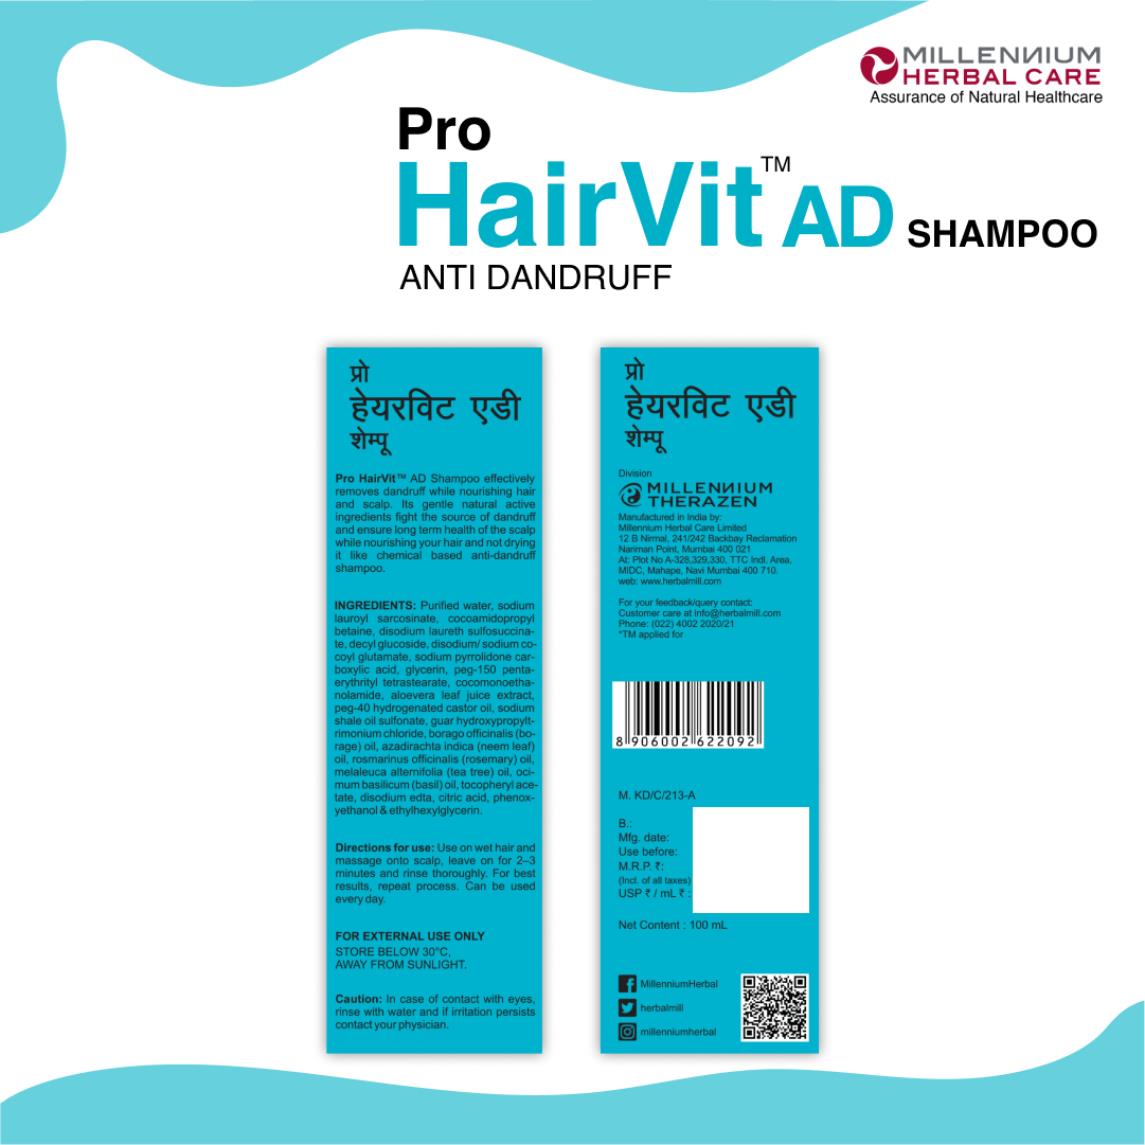 Back of the pack of Pro Hairvit AD Shampoo